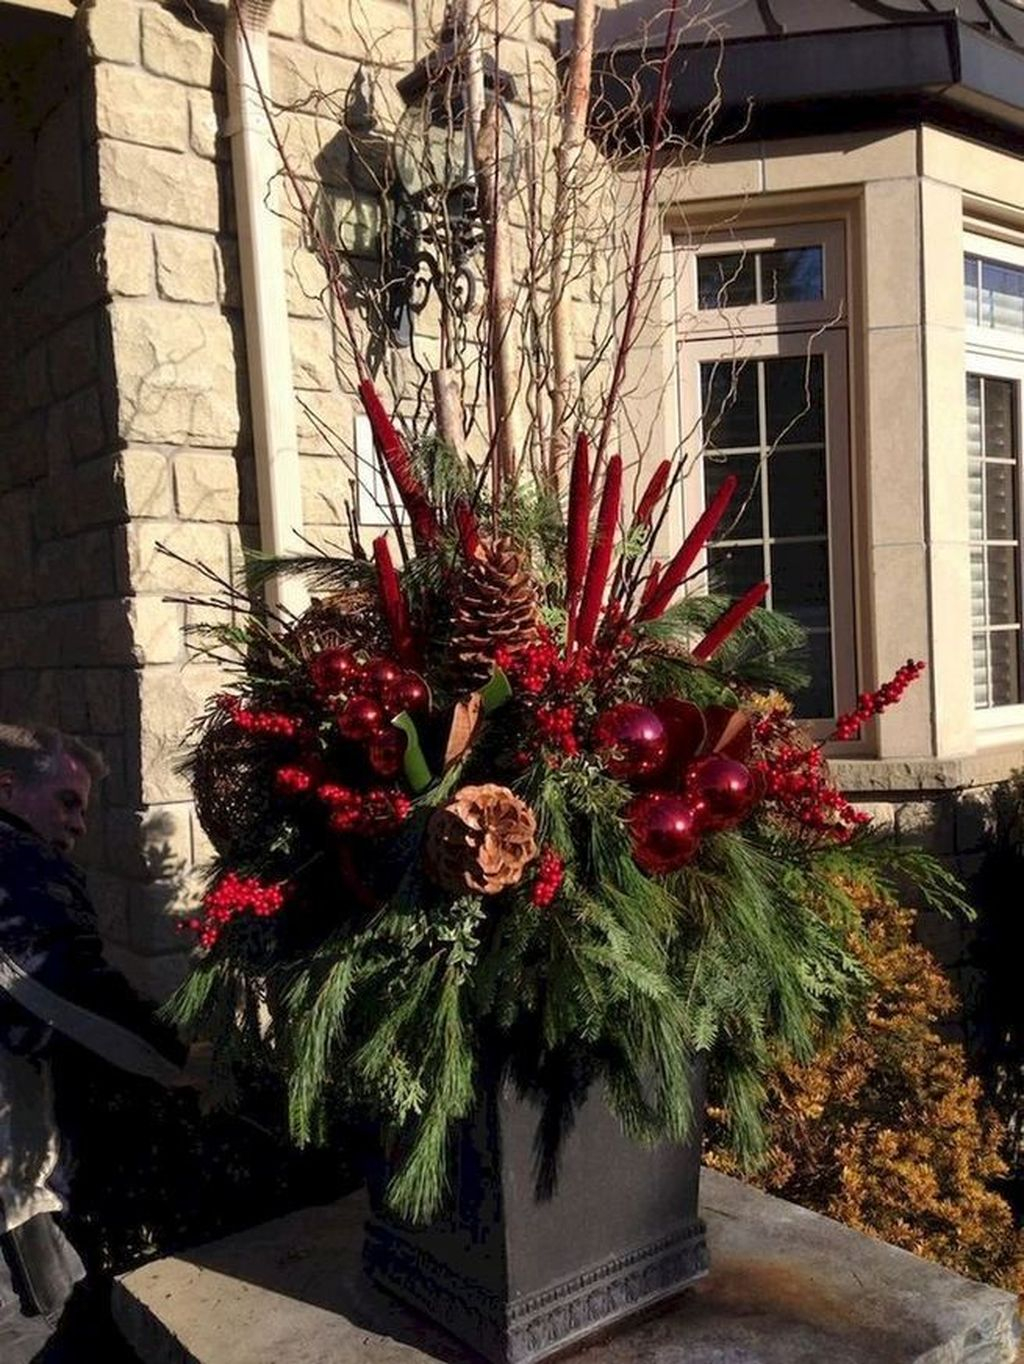 Marvelous Outdoor Holiday Planter Ideas To Beauty Porch Décor 16